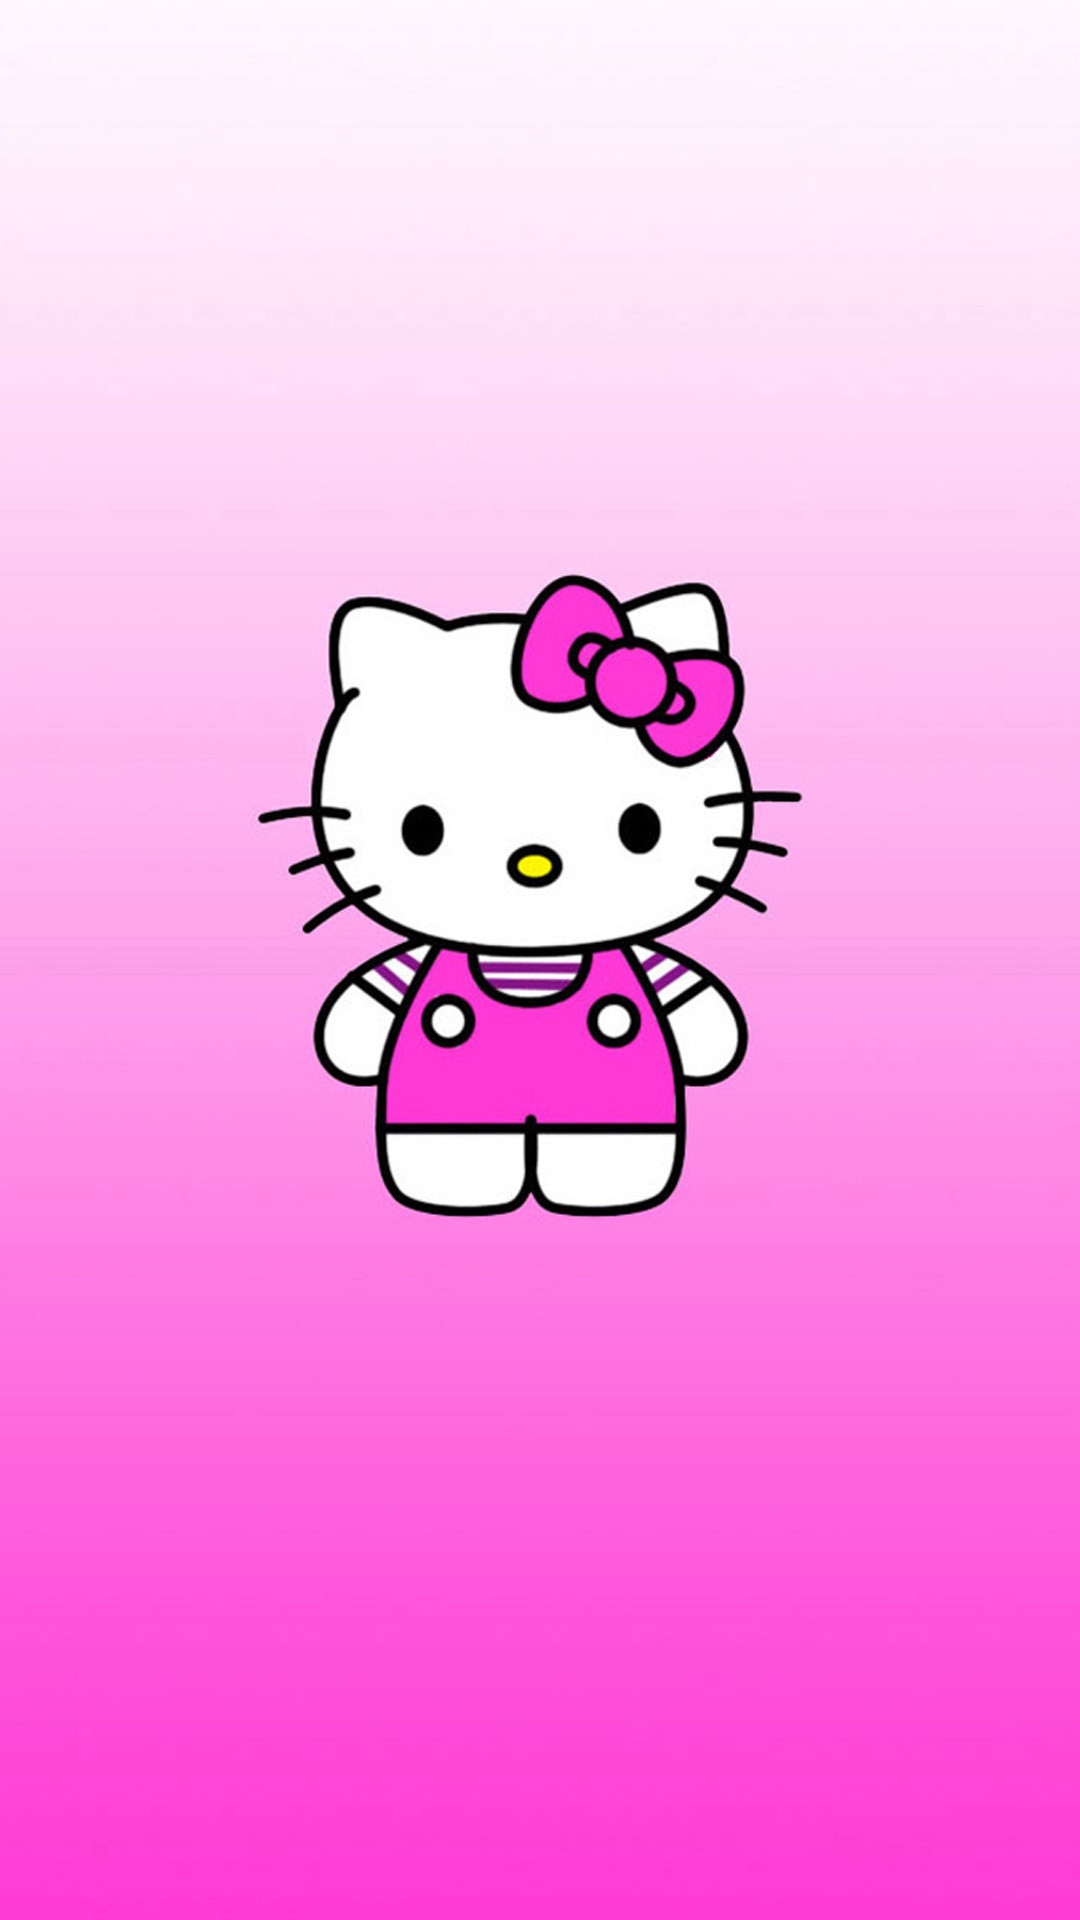 1080x1920, Cute Pink Catty Iphone New Hd Wallpapers - Hello Kitty Wallpaper Small - HD Wallpaper 